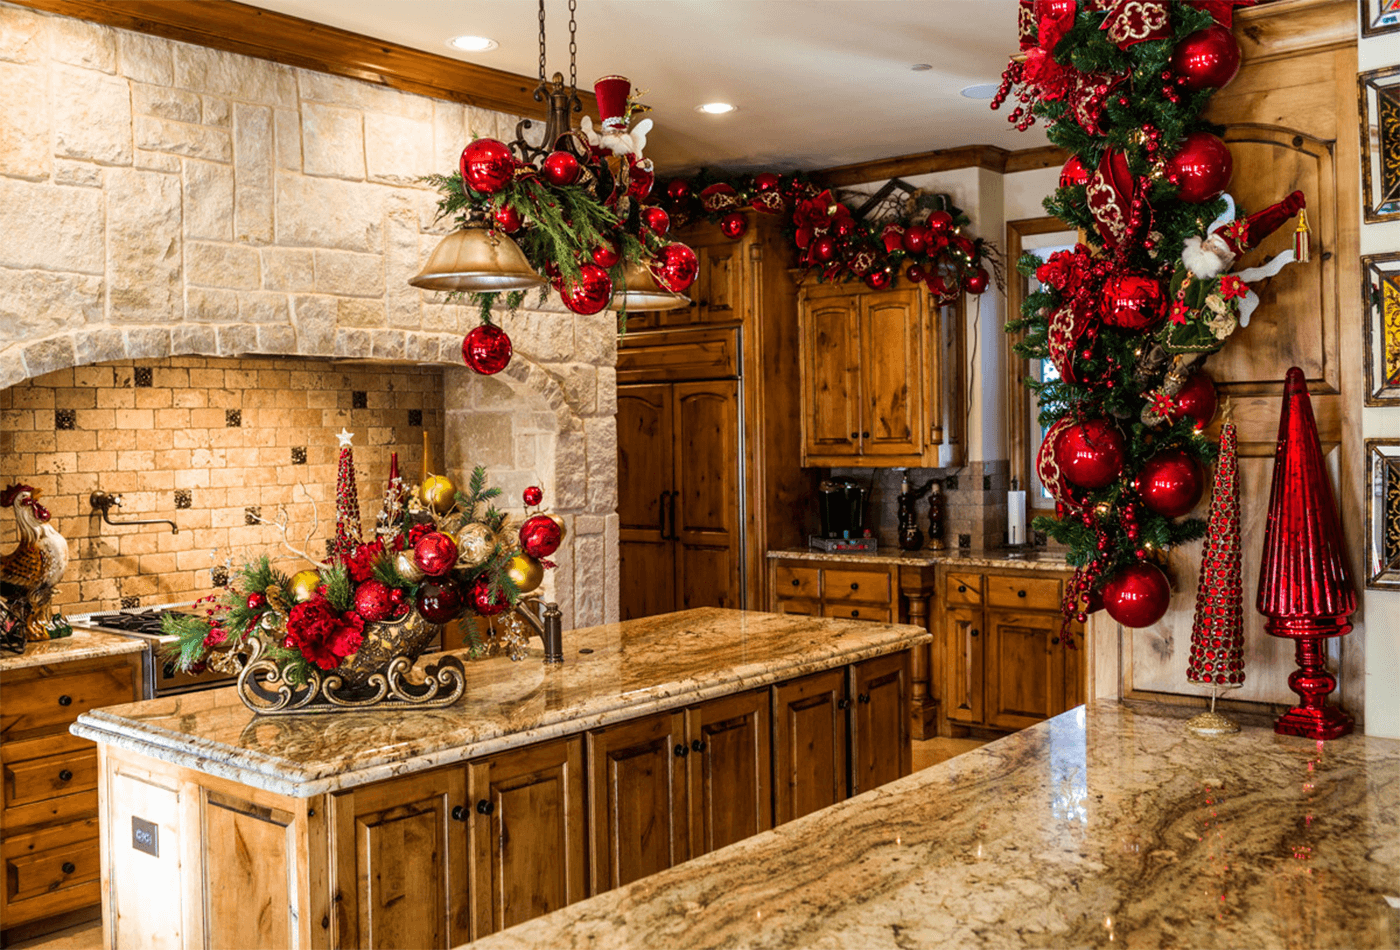 Spruce Up Your Christmas Kitchen